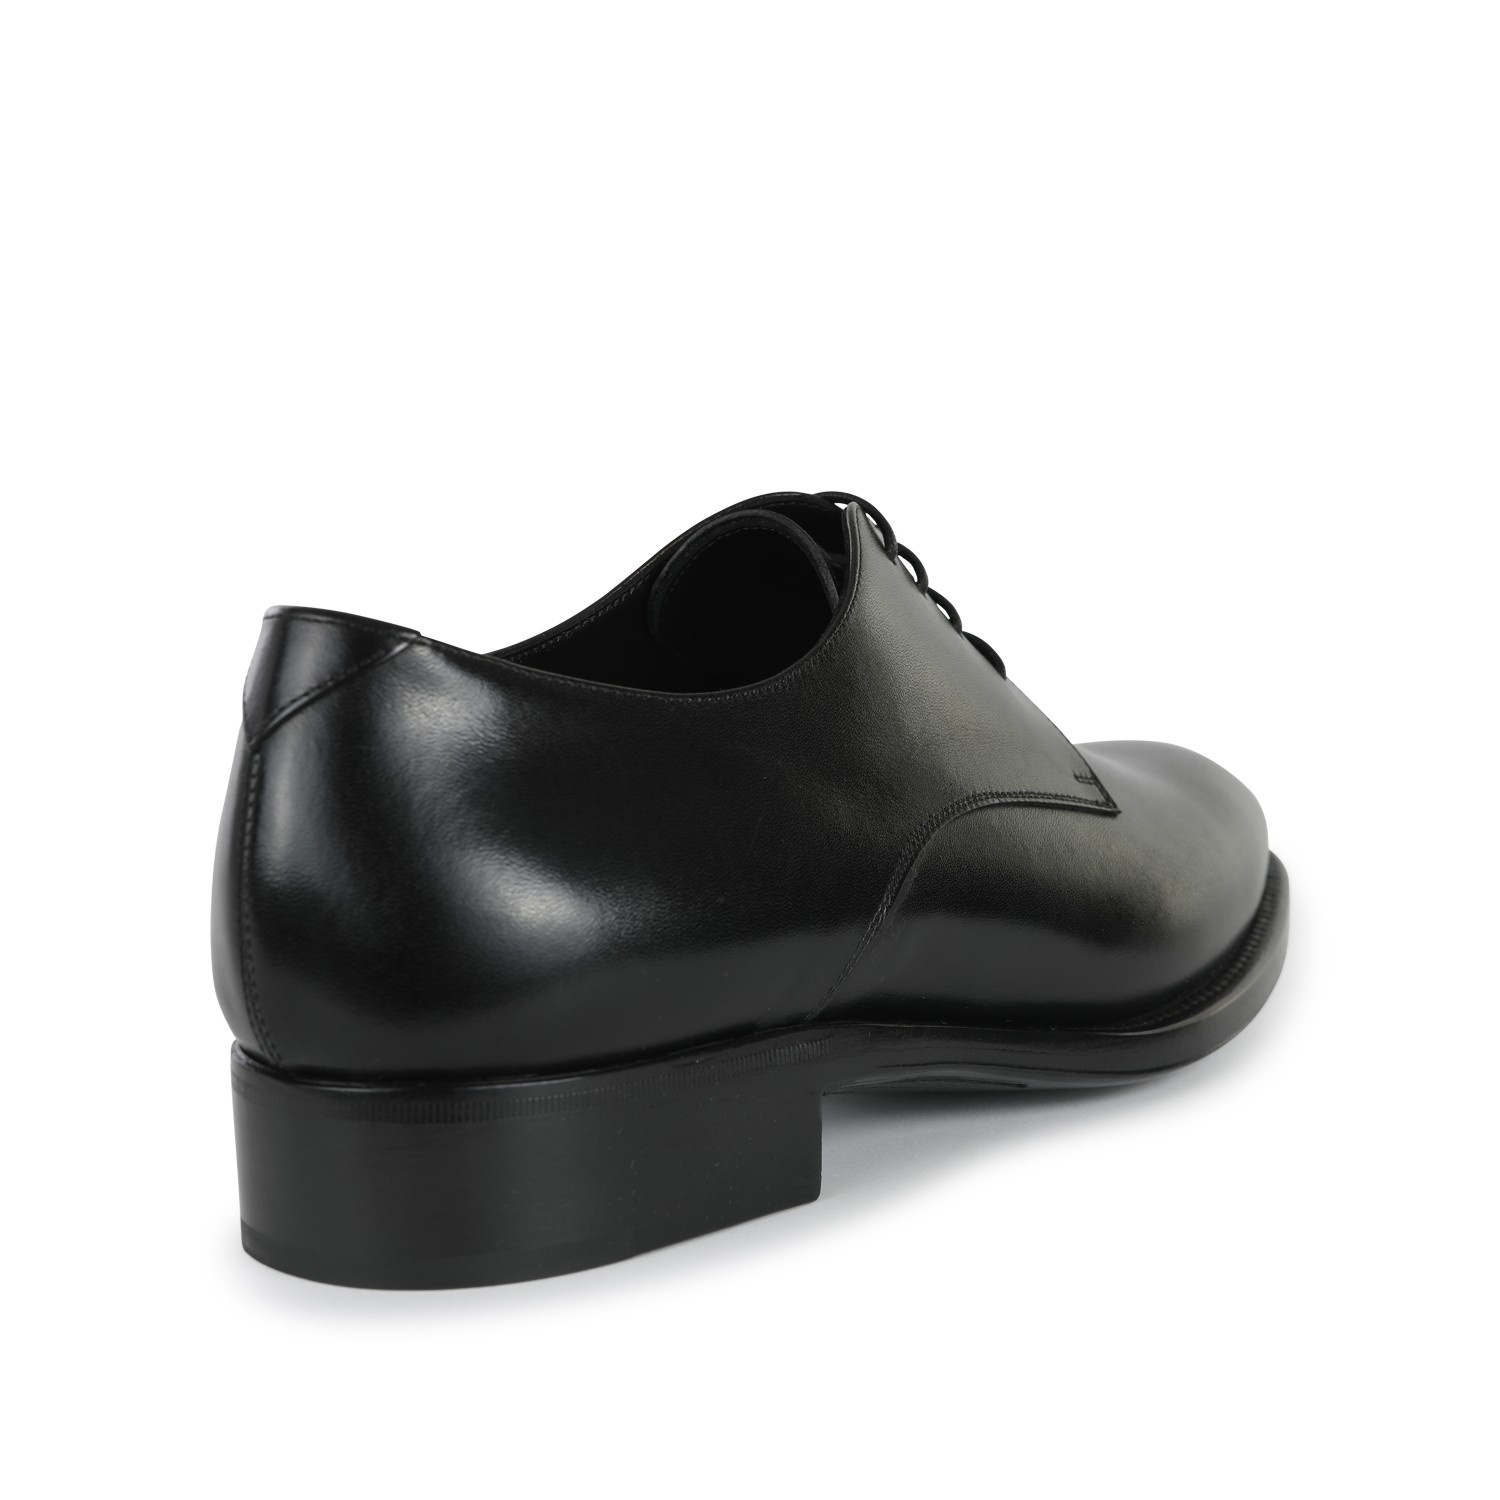 BLACK LEATHER LACE UP SHOES - 3